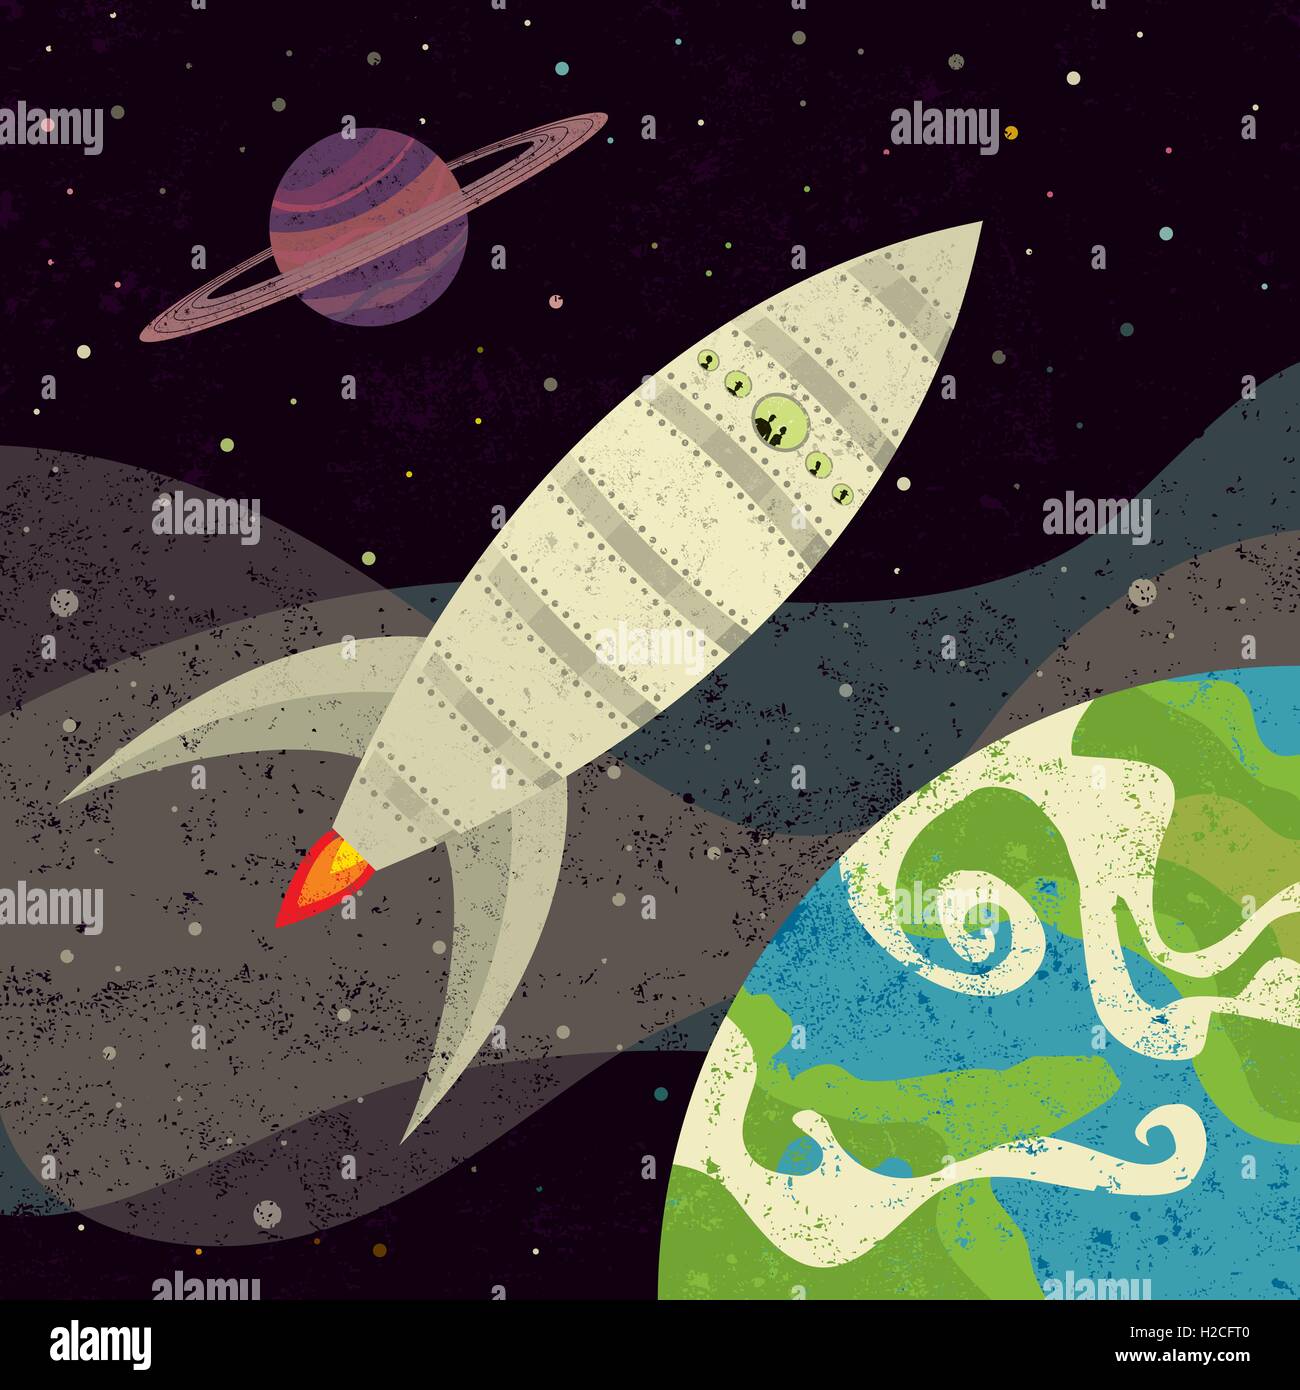 Space exploration Retro-styled rocket exploring planets in outer space. Stock Vector